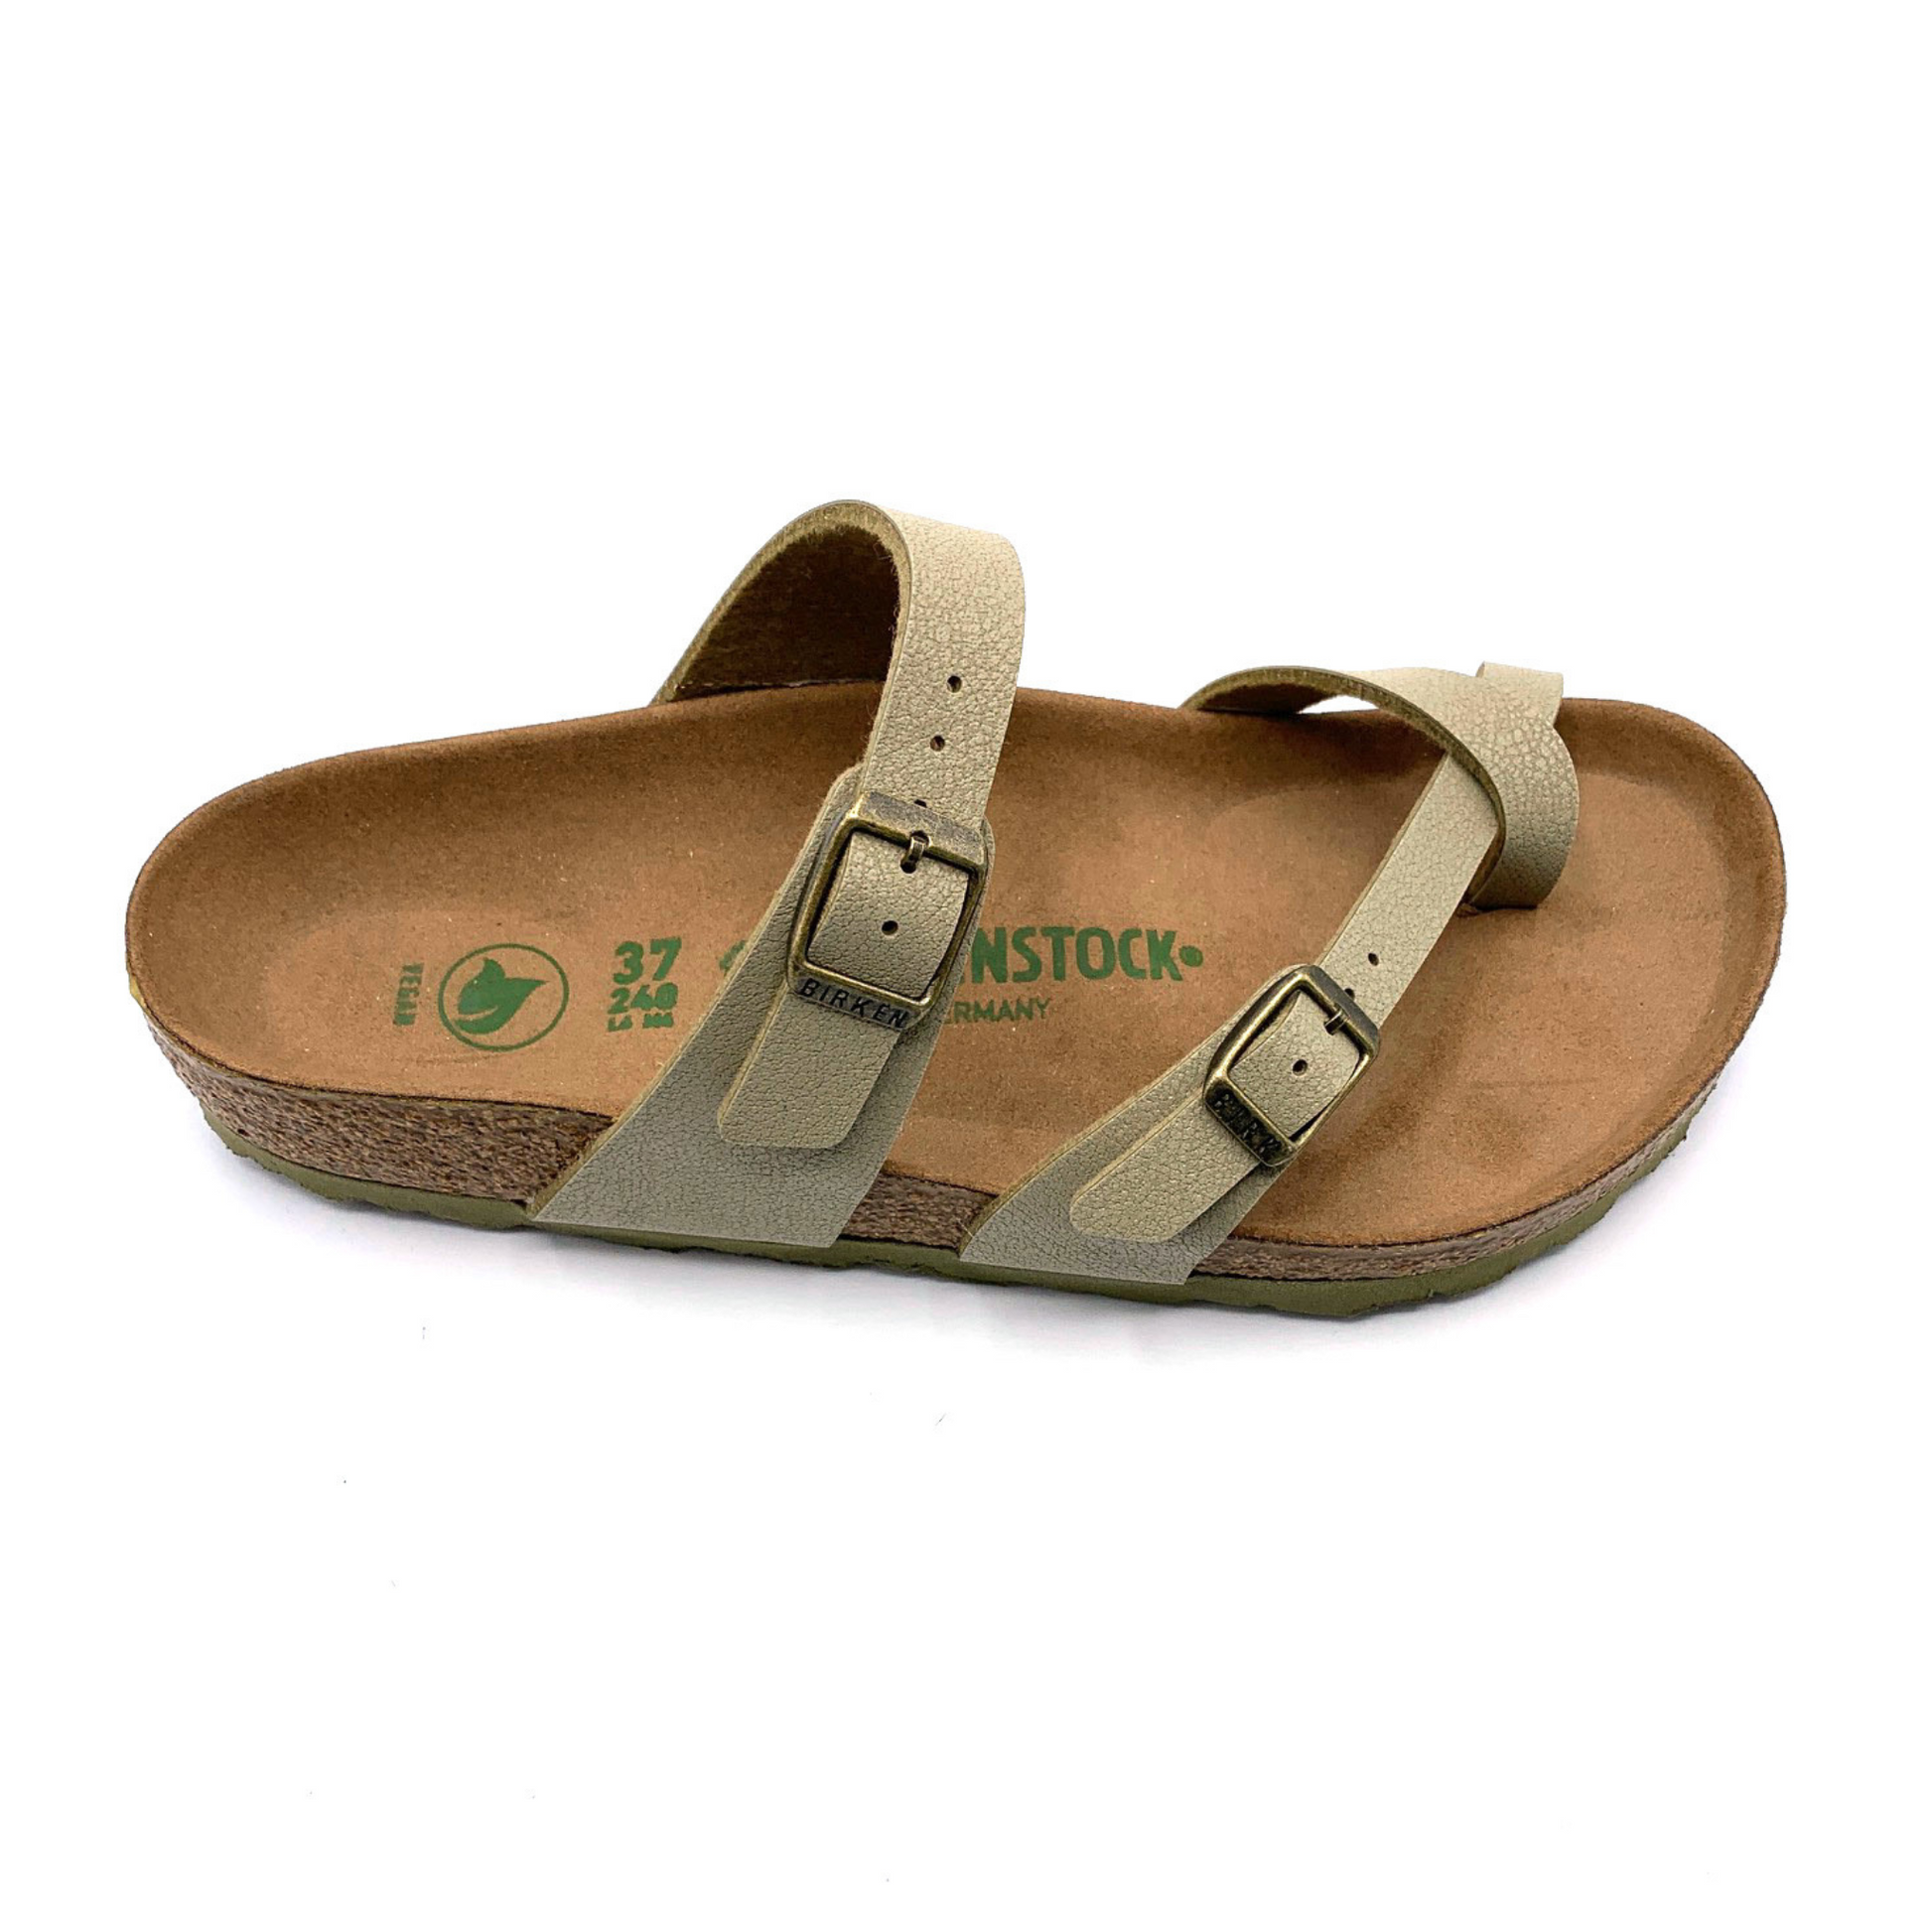 A side angle view of a sandal with a caramel-brown cork sole, two light-khaki straps, and brushed nickel buckles. One of the straps goes over the upper part of the foot, and the other goes between the toes.